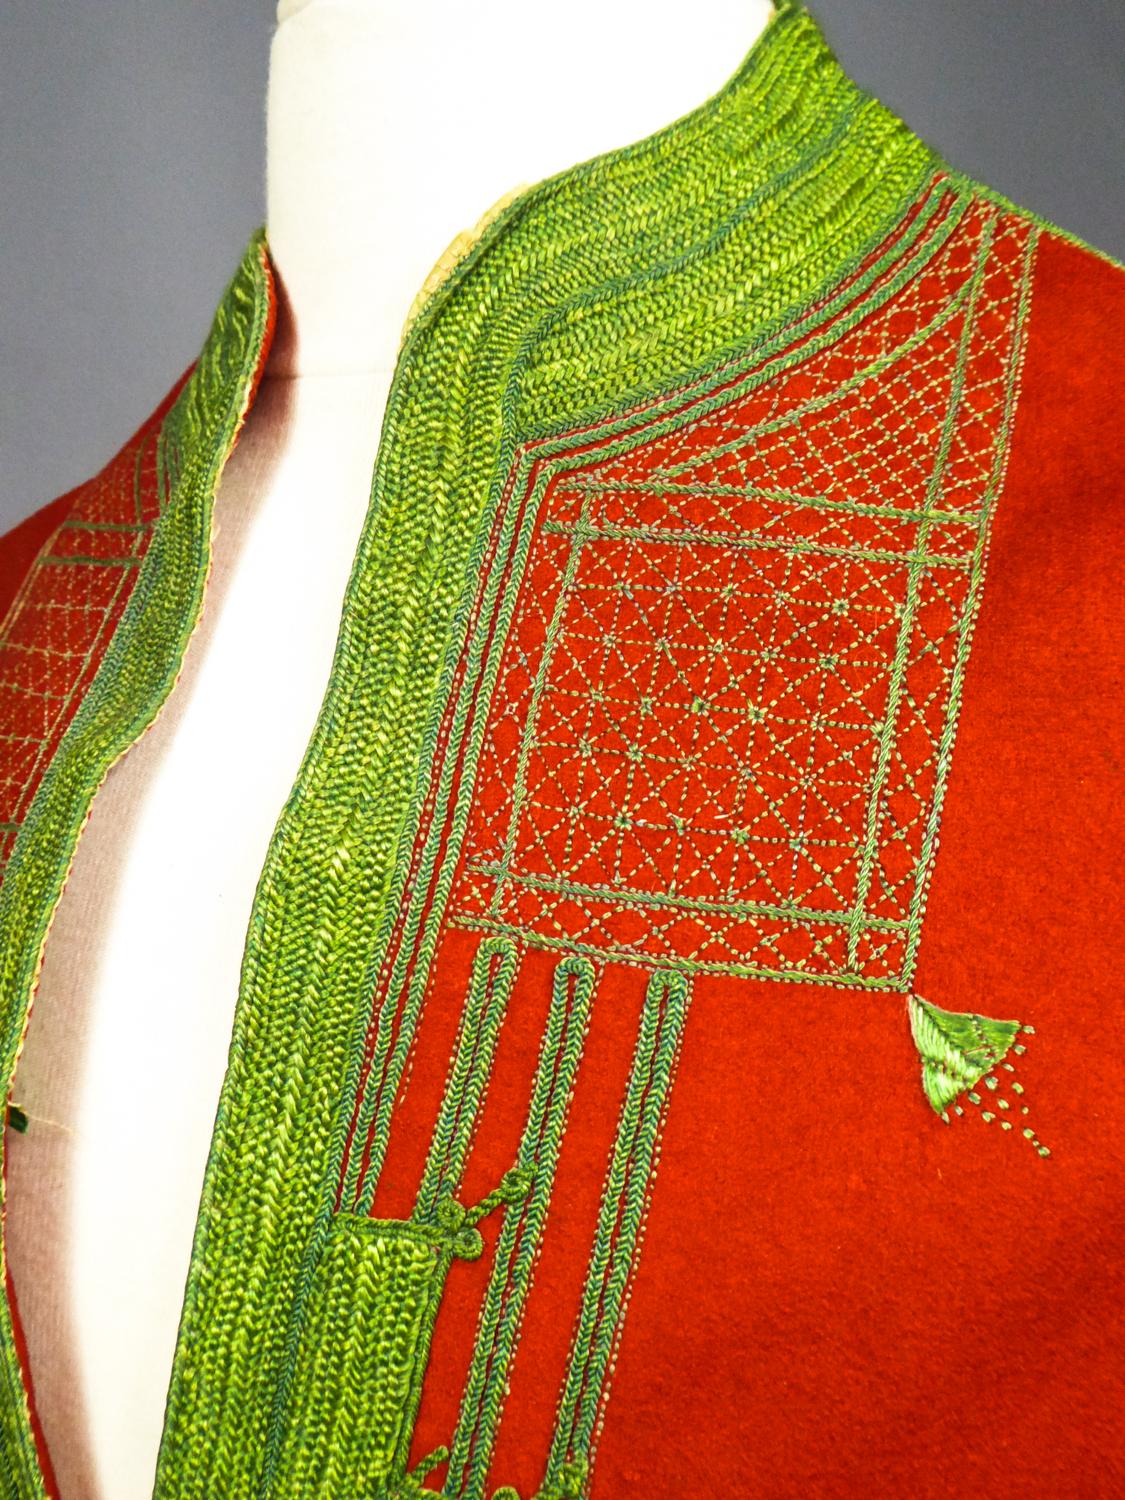 Women's or Men's A Ceremonial Jebba Tunic in Felt Embroidered with Silk - Tunisia Circa 1900/1950 For Sale